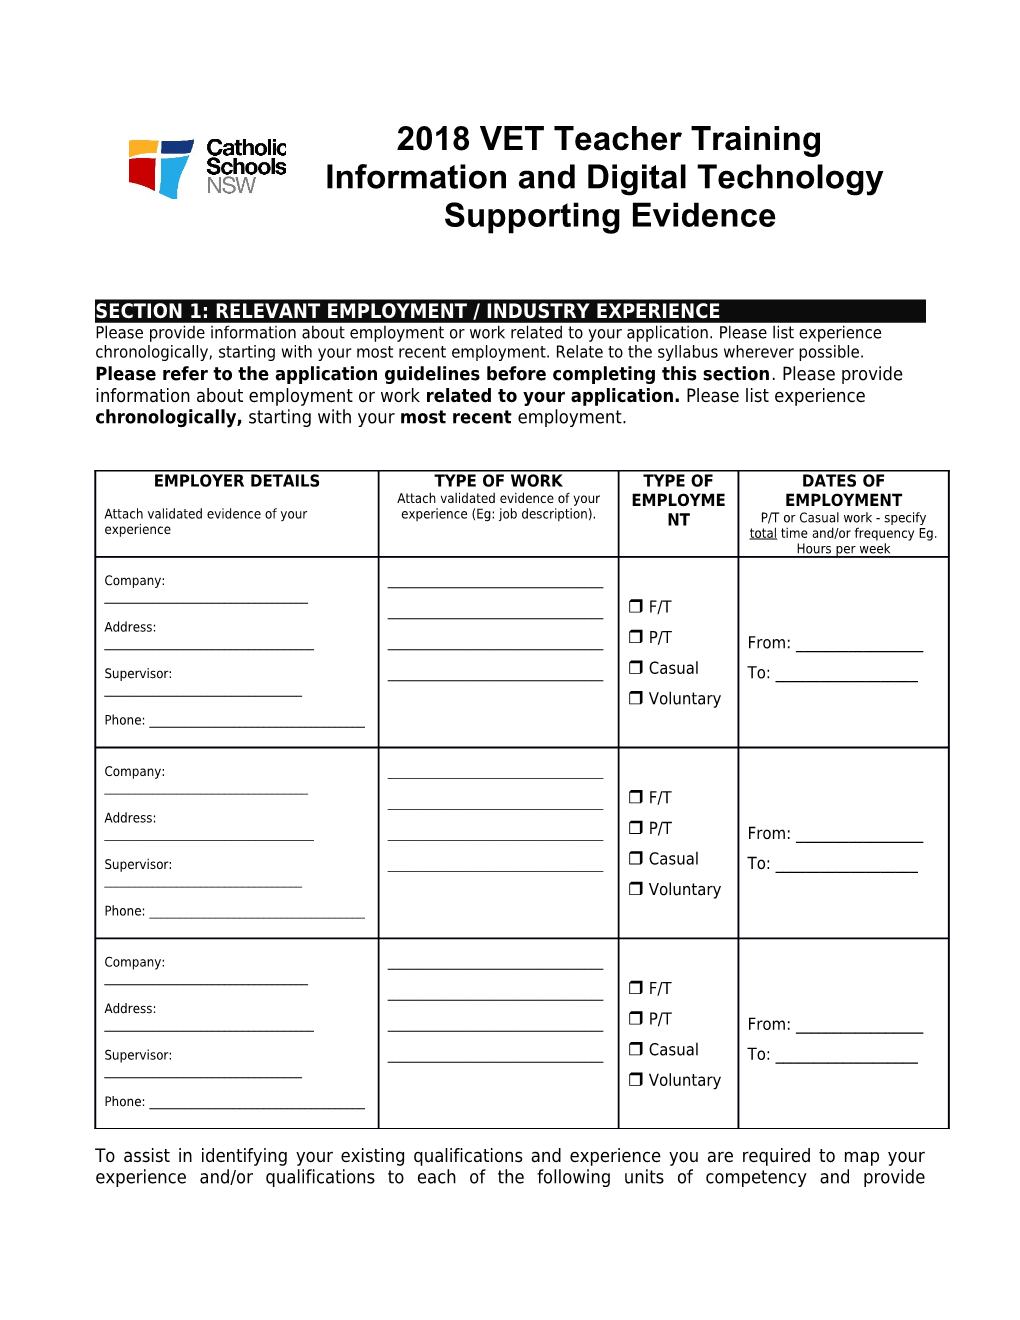 2018 Information and Digital Technology Application